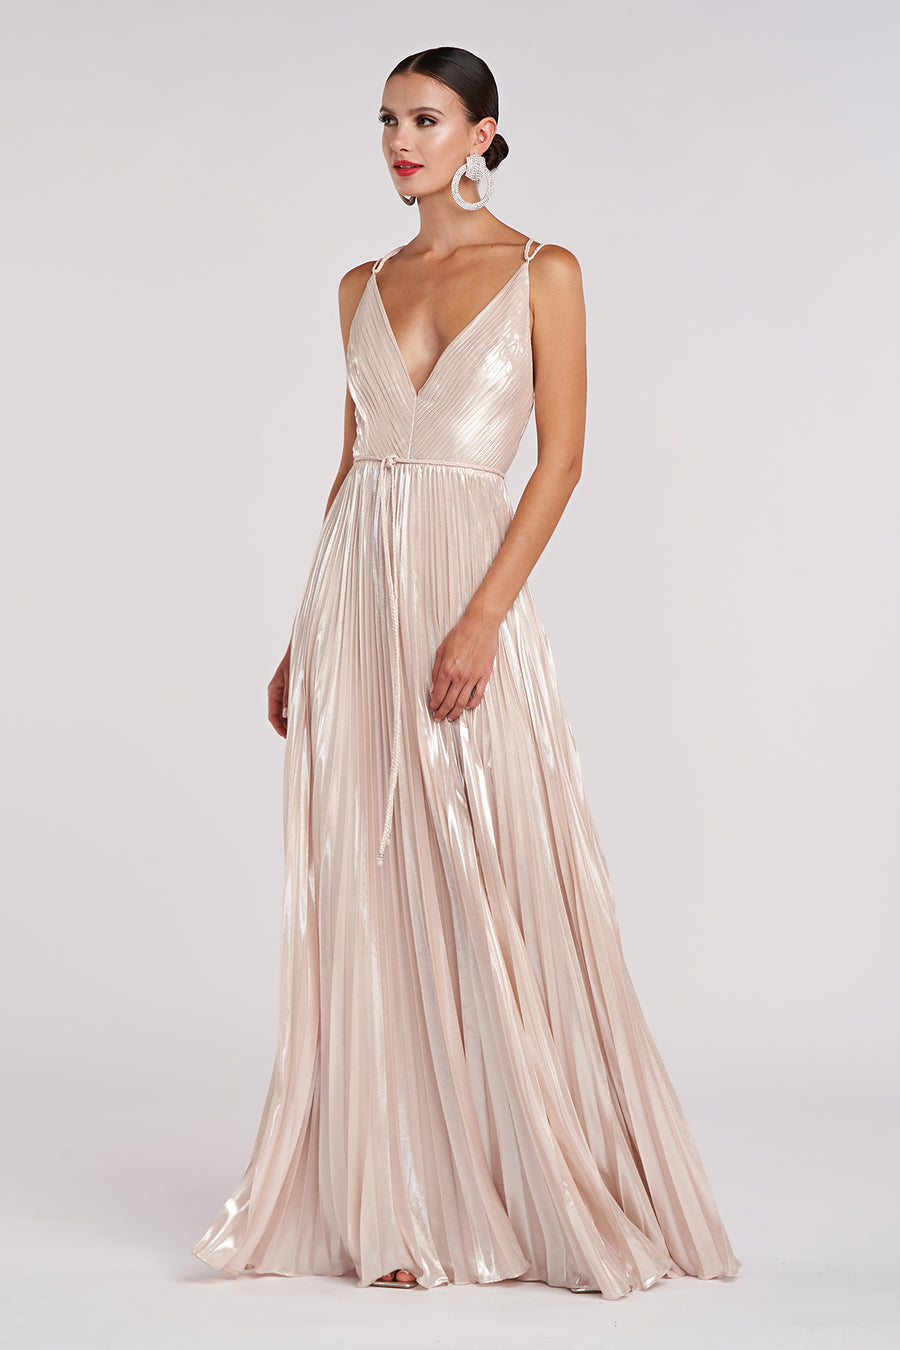 Ace Gown In Foil Chiffon